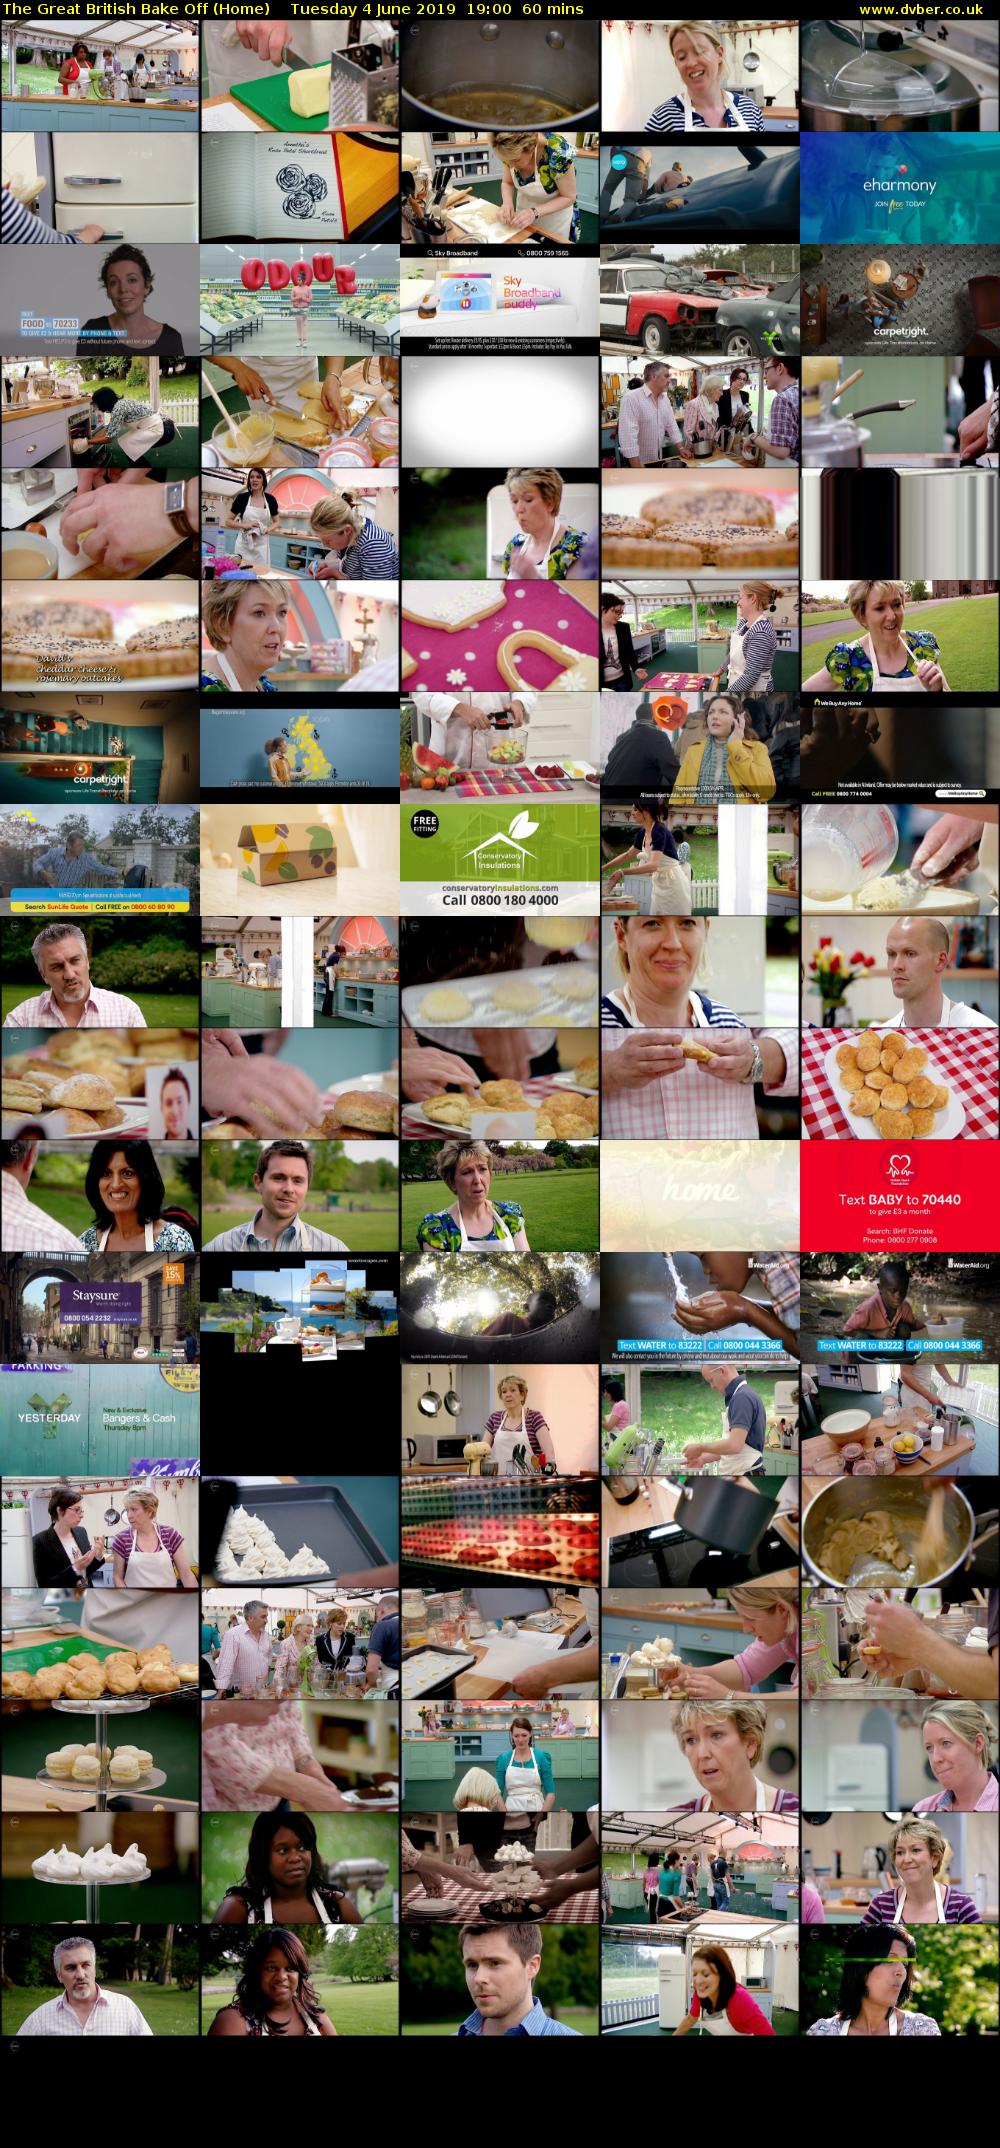 The Great British Bake Off (Home) Tuesday 4 June 2019 19:00 - 20:00